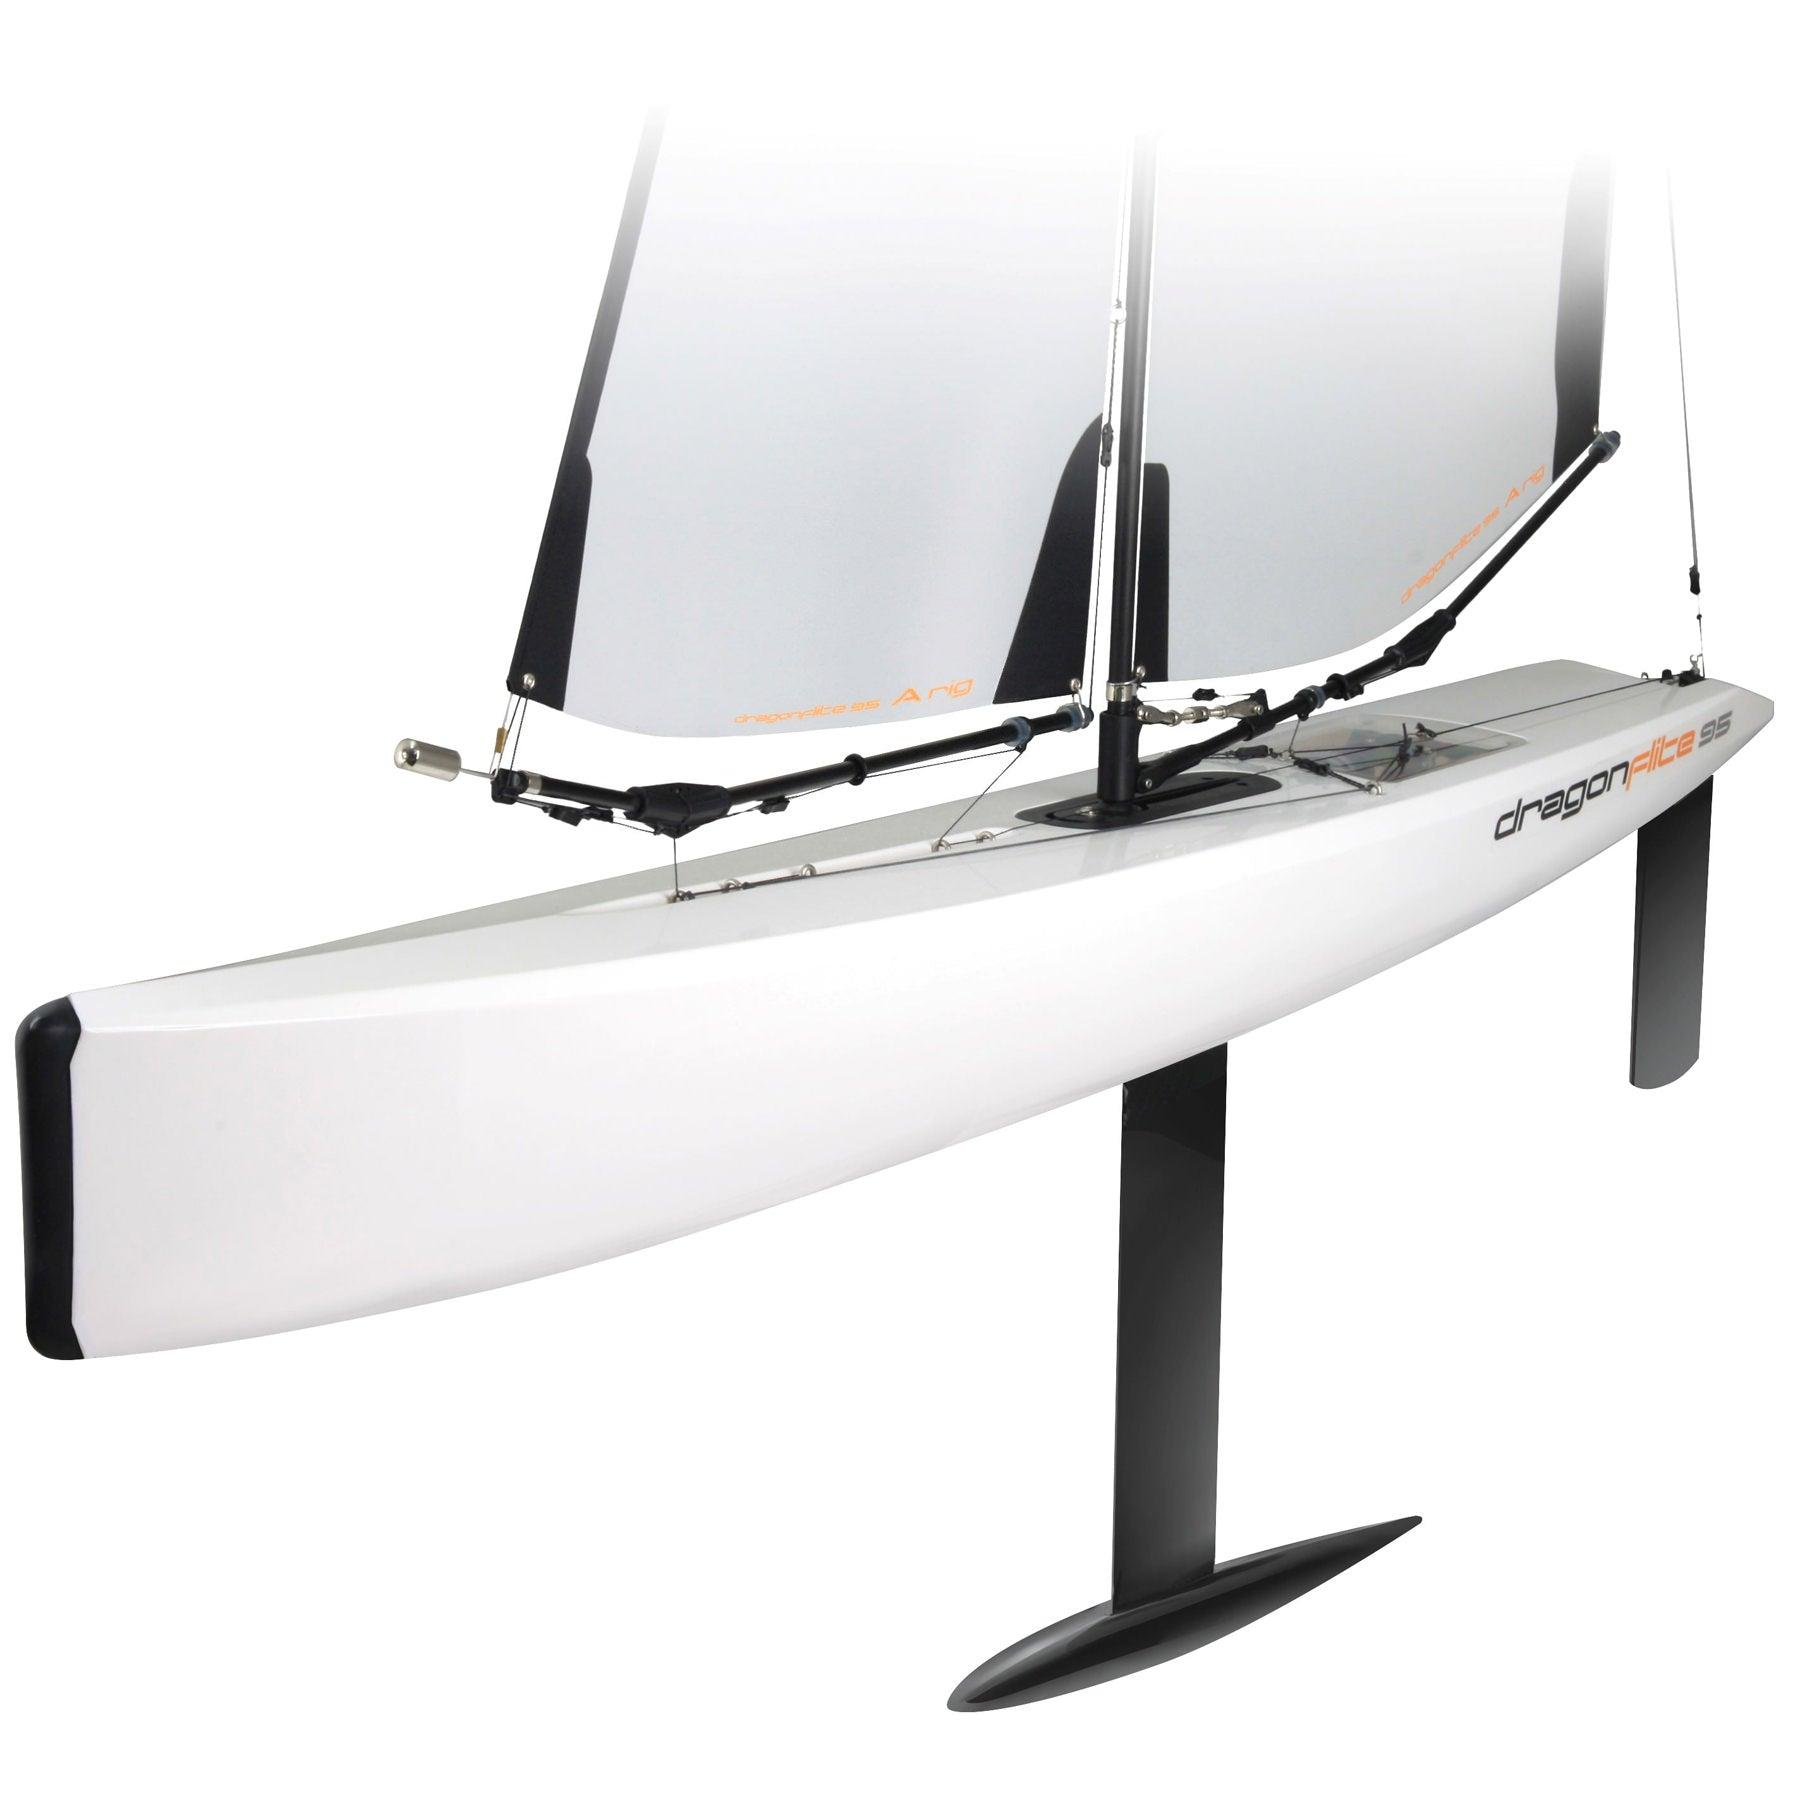 Dragon 95 Rc Sailboat: Get ahead in the race with the Dragon 95 RC Sailboat